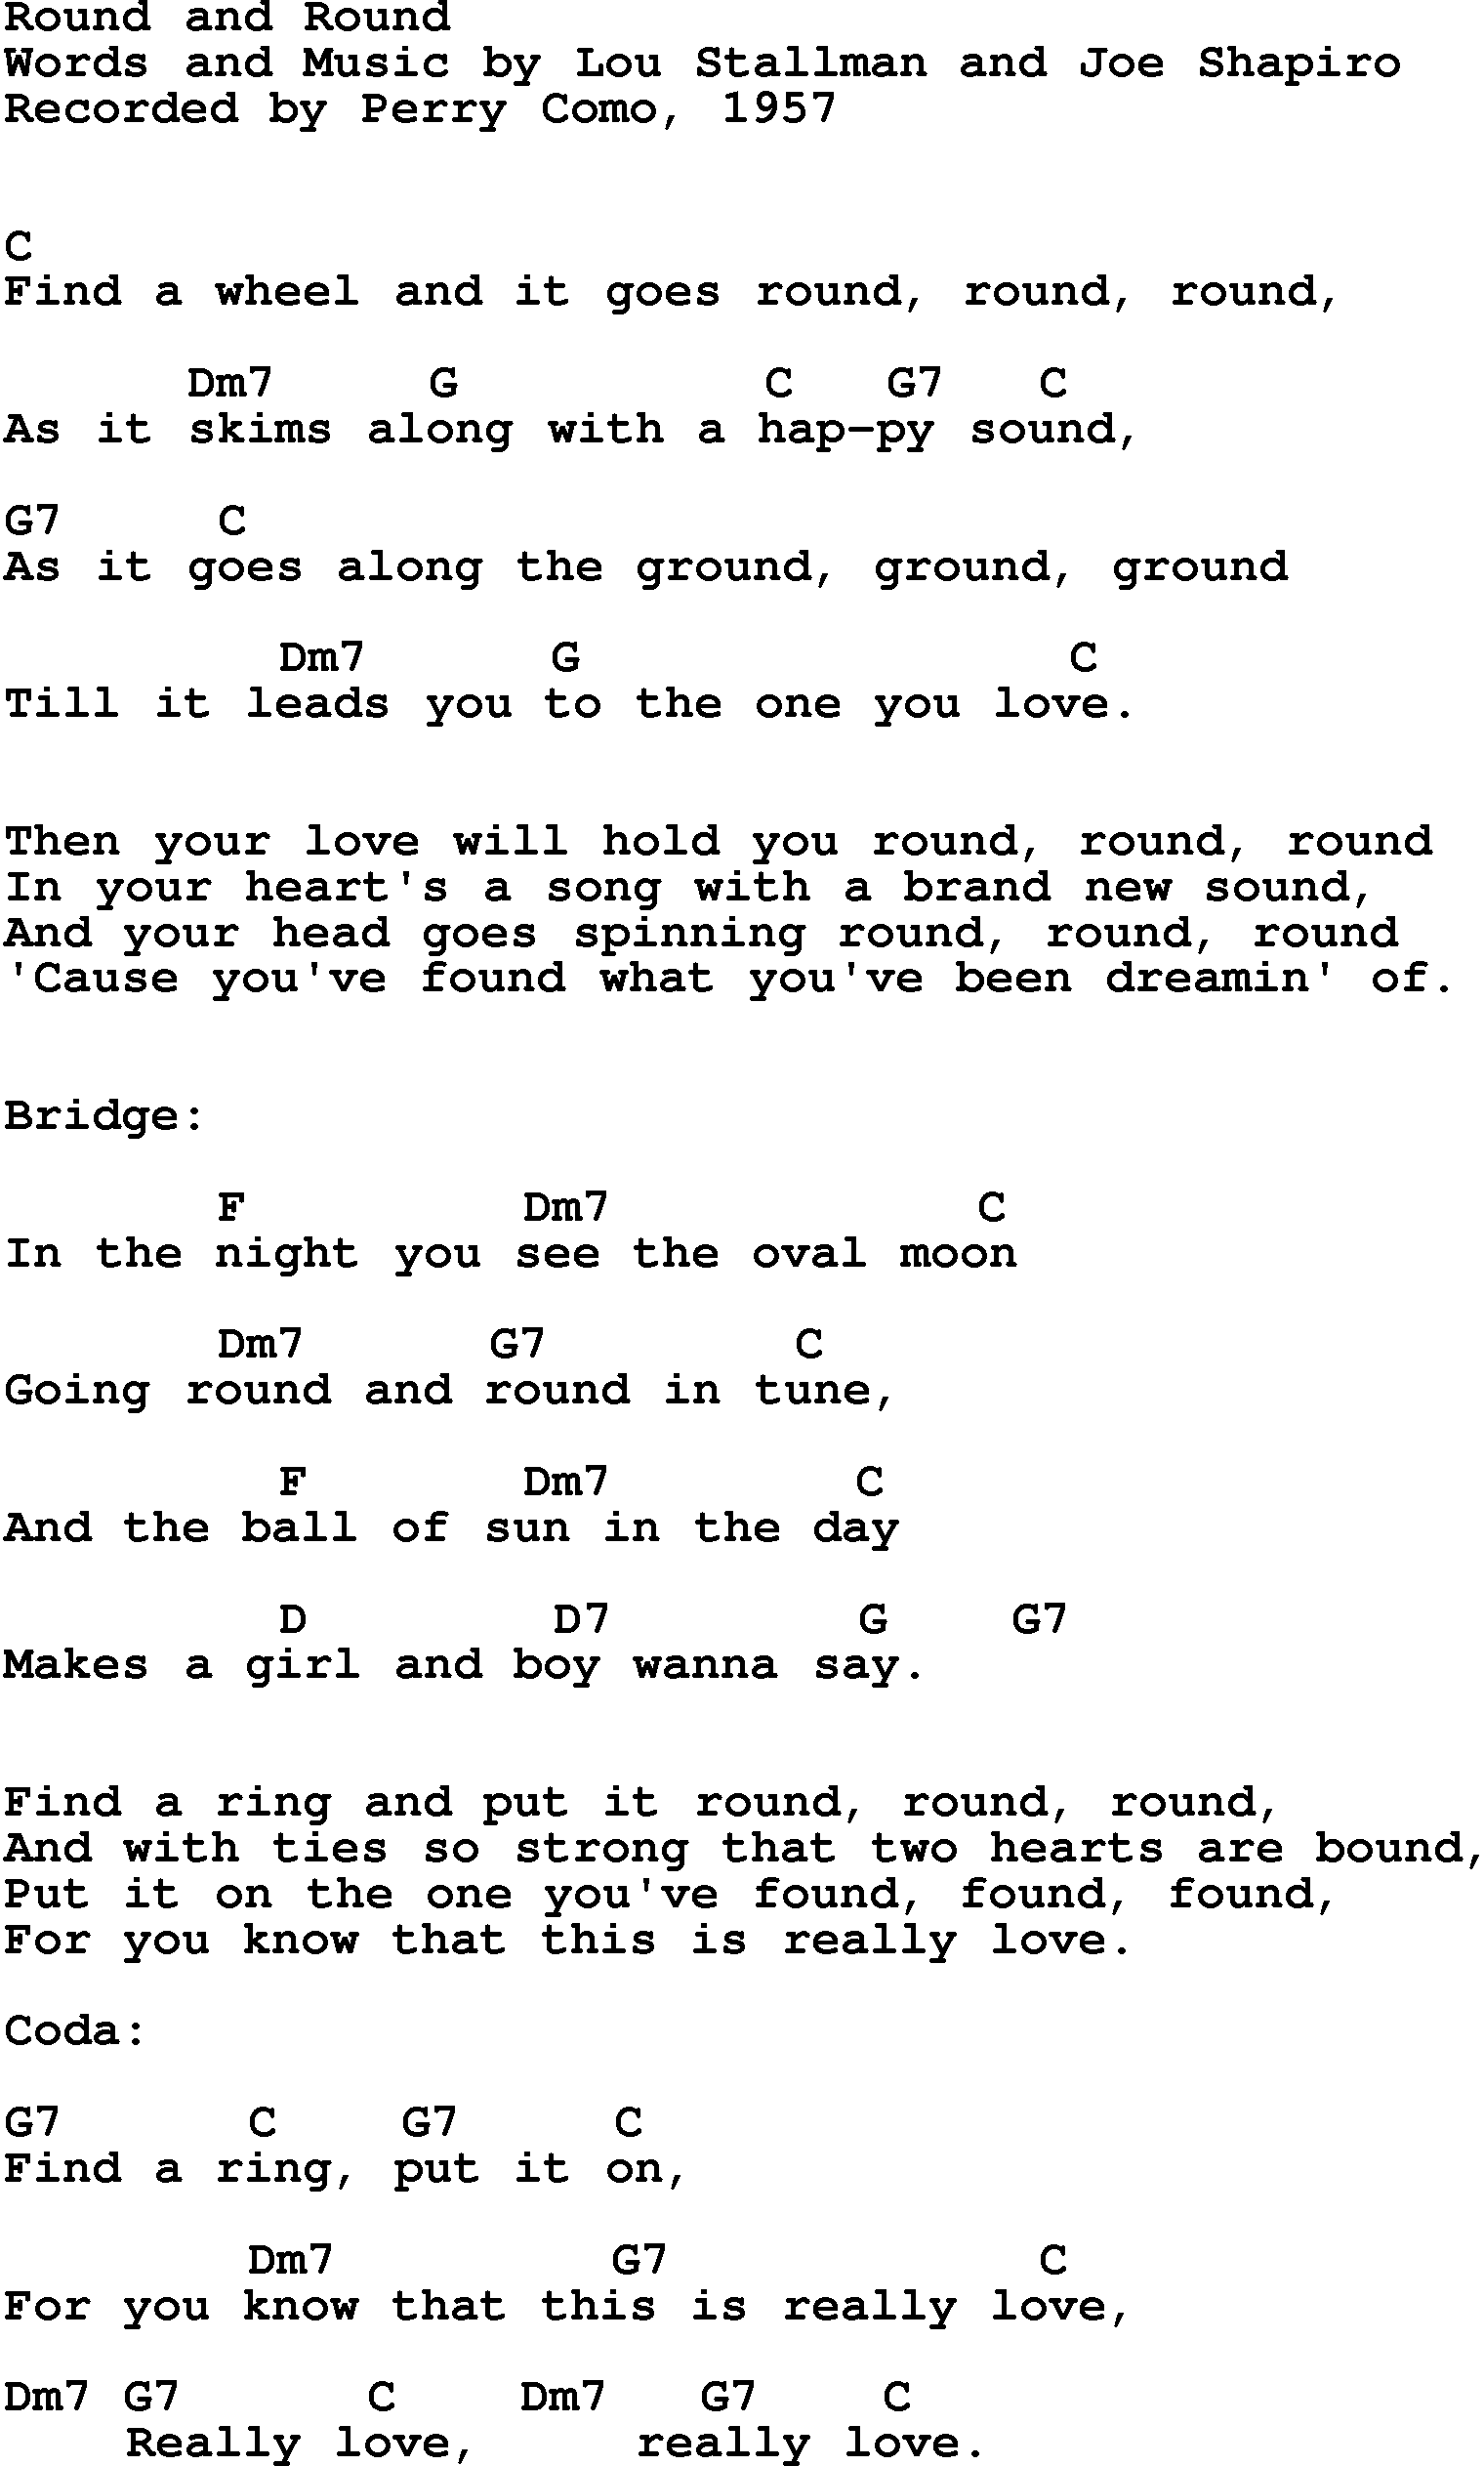 Song Lyrics with guitar chords for Round And Round - Perry Como, 1957